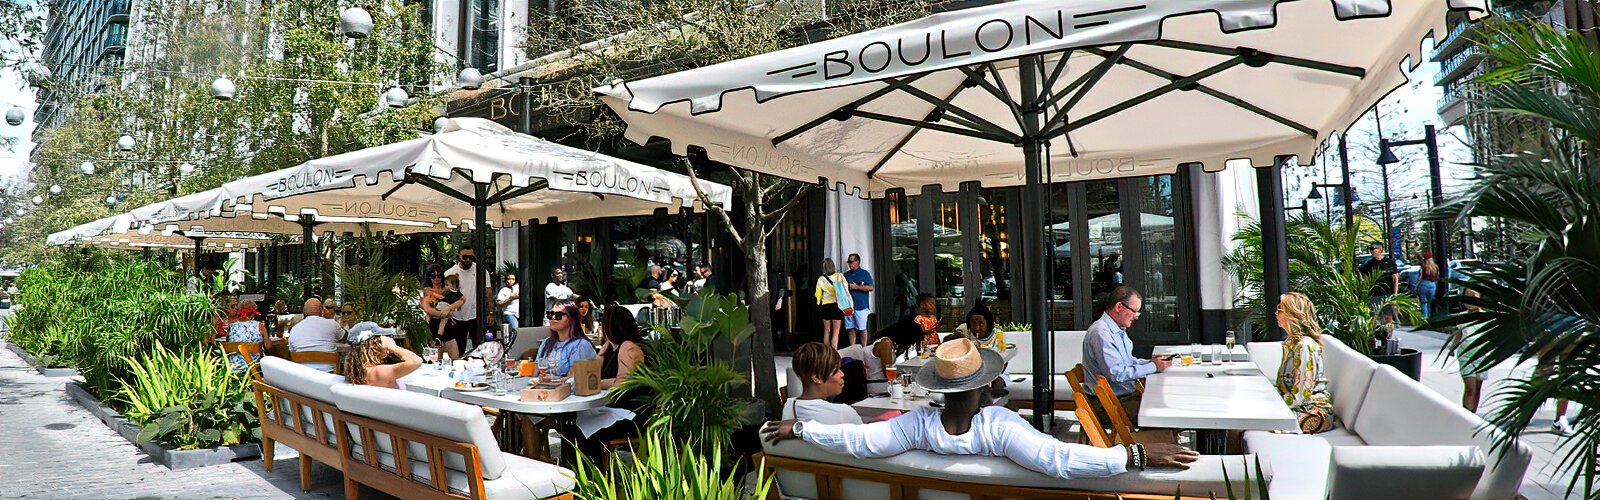  The outdoor patio of the newly opened Boulon Brasserie is a great place to relax and enjoy a menu described as “French by way of America”.